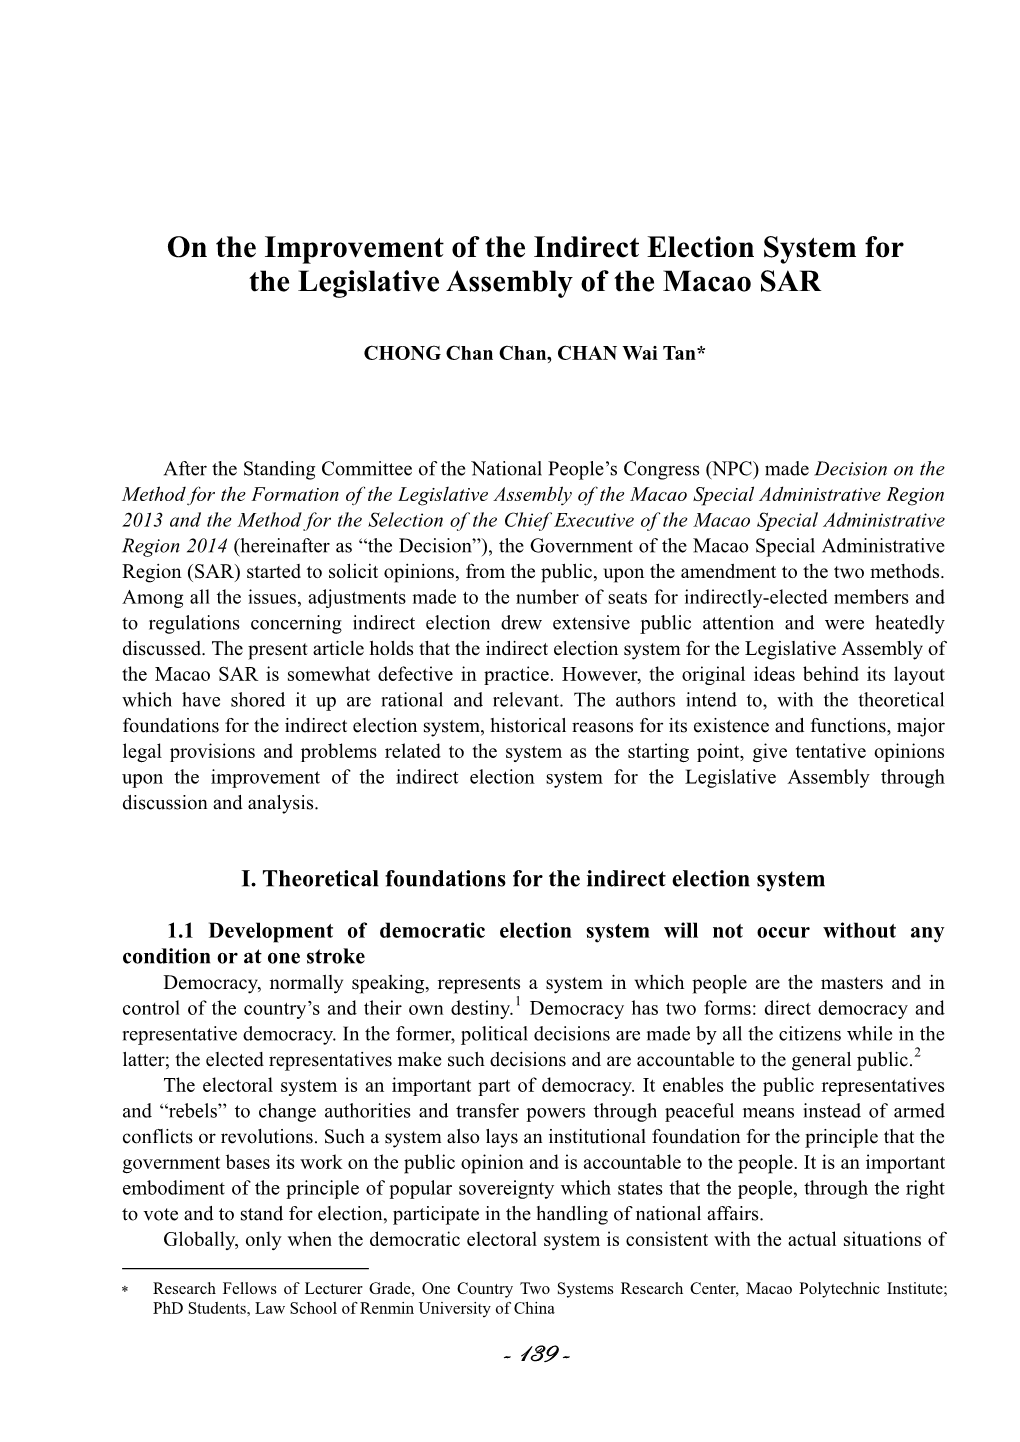 On the Improvement of the Indirect Election System for the Legislative Assembly of the Macao SAR